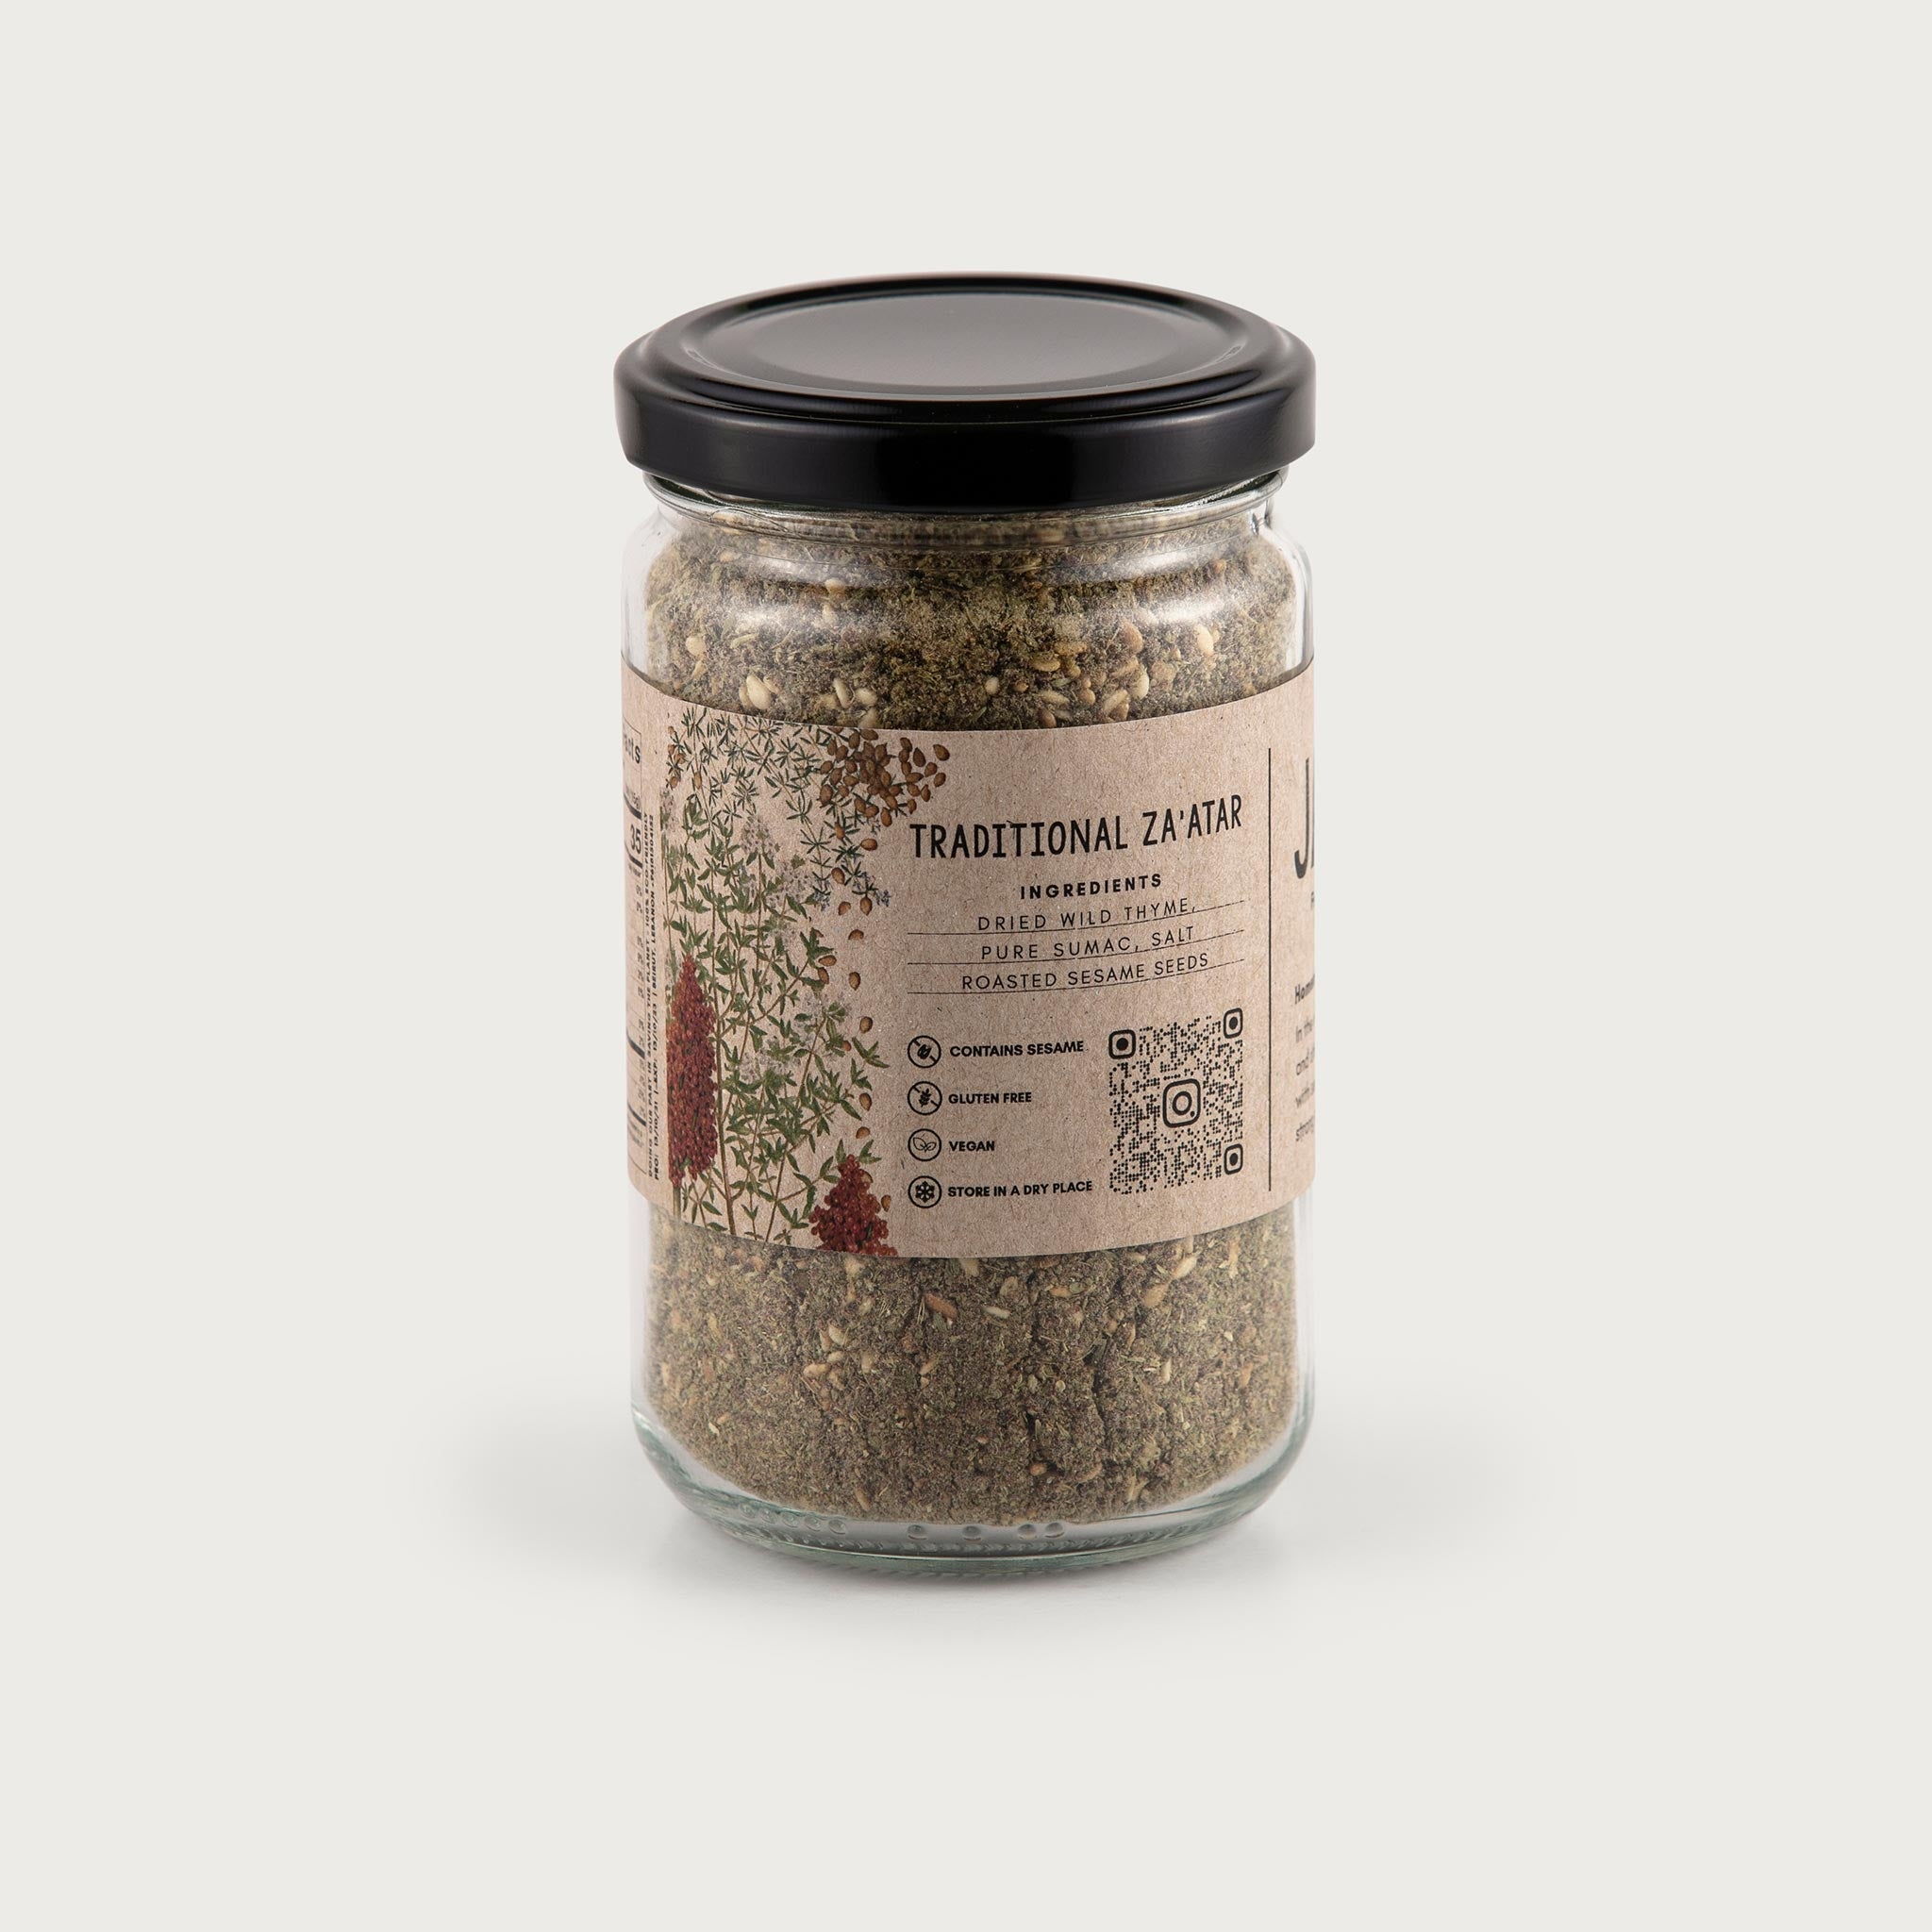 This clear jar of Traditional Za'atar showcases the beautiful ingredients inside. You can see the herbs, beautifully sage green, brown, and dried. The label is kraft brown in color and features illustrations of the herbs inside. The label reads: Traditional Za'atar with ingredients dried wild thyme, pure sumac, salt, roasted sesame seeds. Contains sesame, gluten free, vegan, and store in a dry place. There is a QR code on the front.